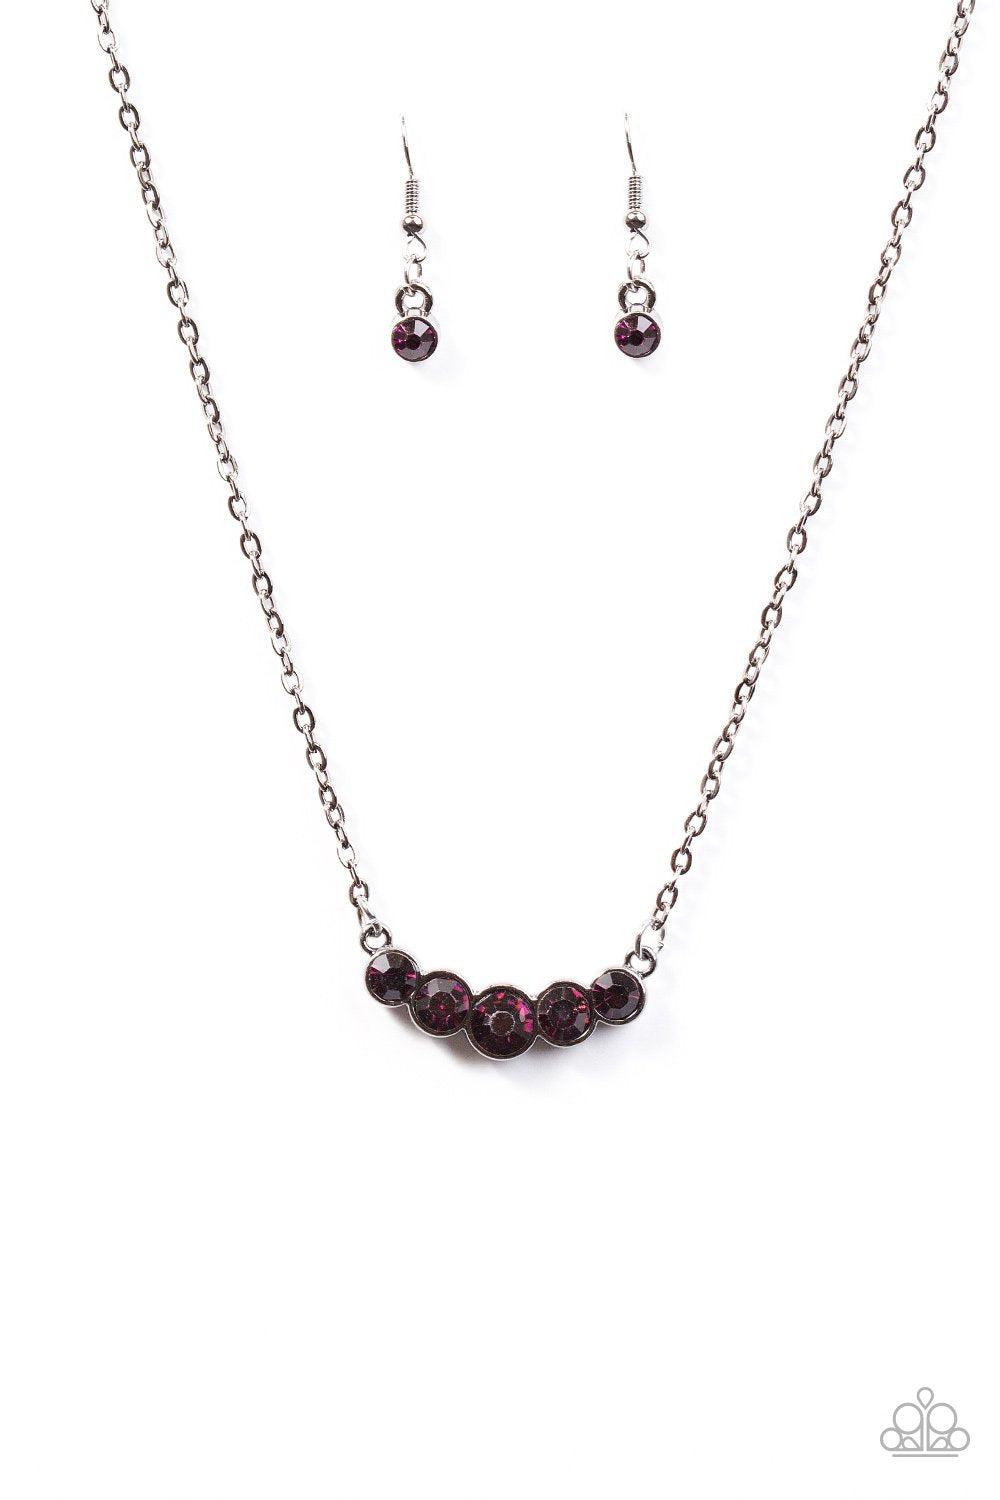 Speaking Of Sparkle Purple Rhinestone and Gunmetal Necklace - Paparazzi Accessories - lightbox -CarasShop.com - $5 Jewelry by Cara Jewels